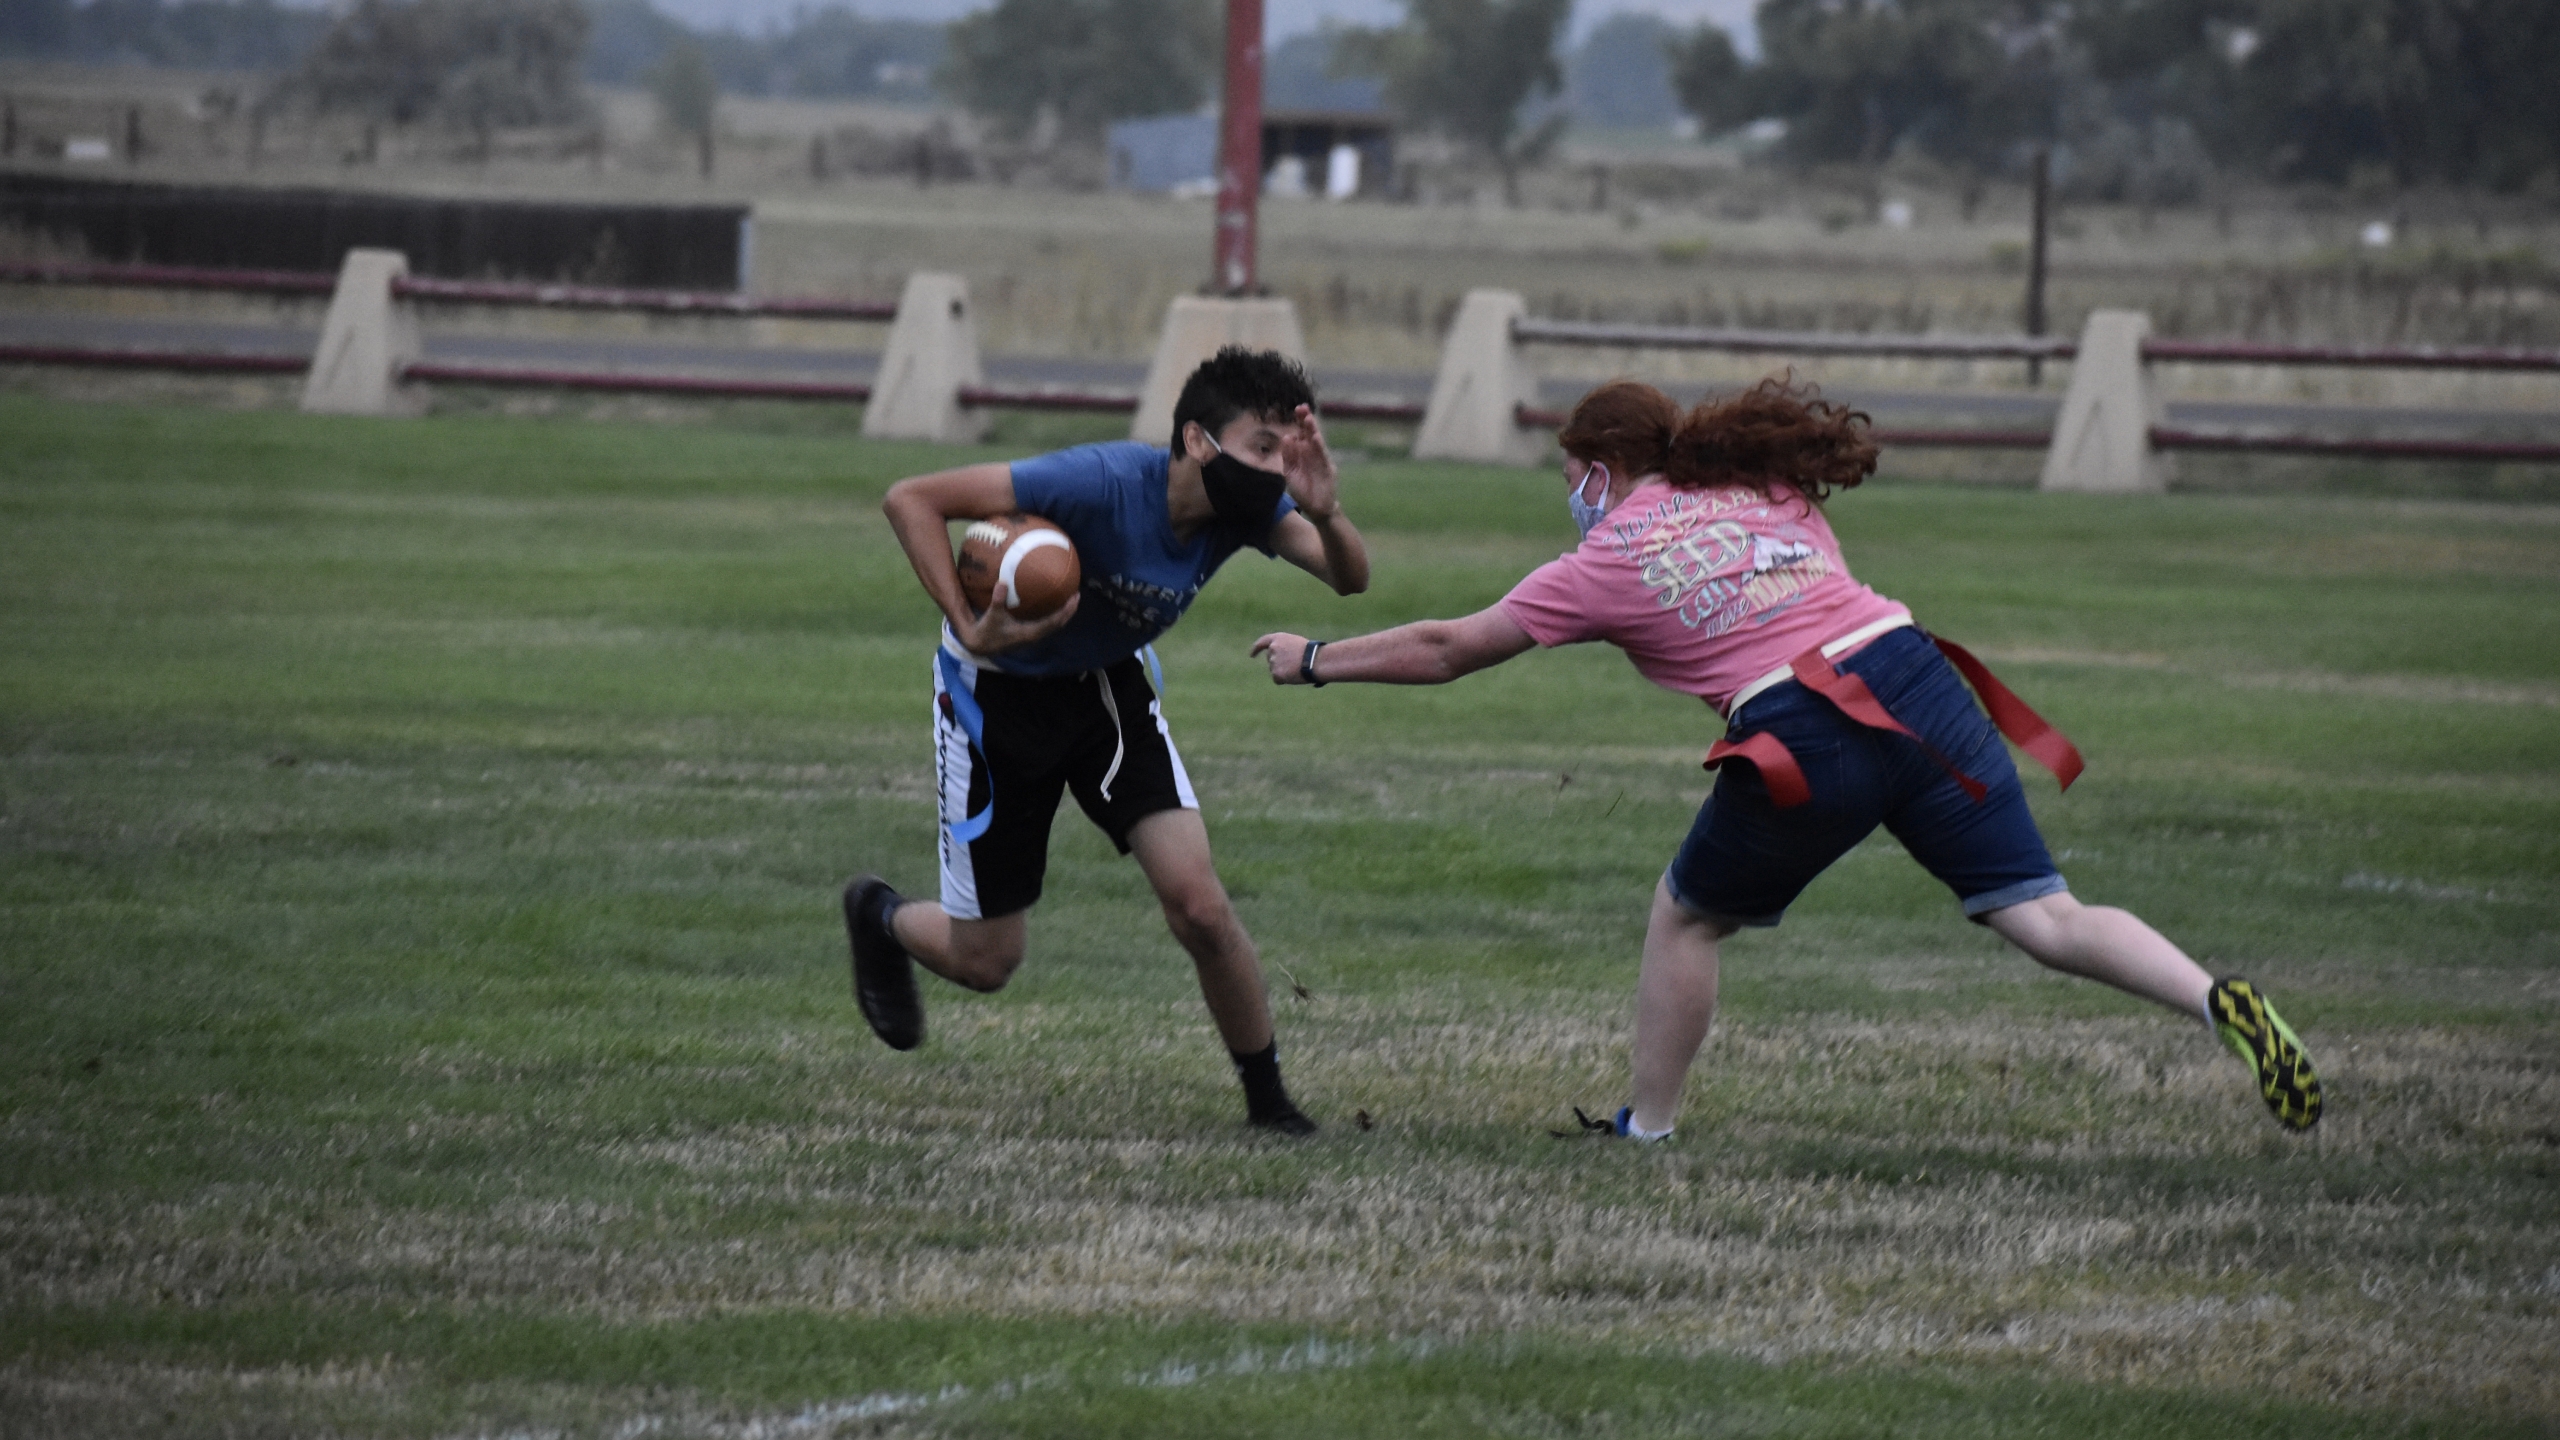 Intramural sports give students an outlet during COVID-19